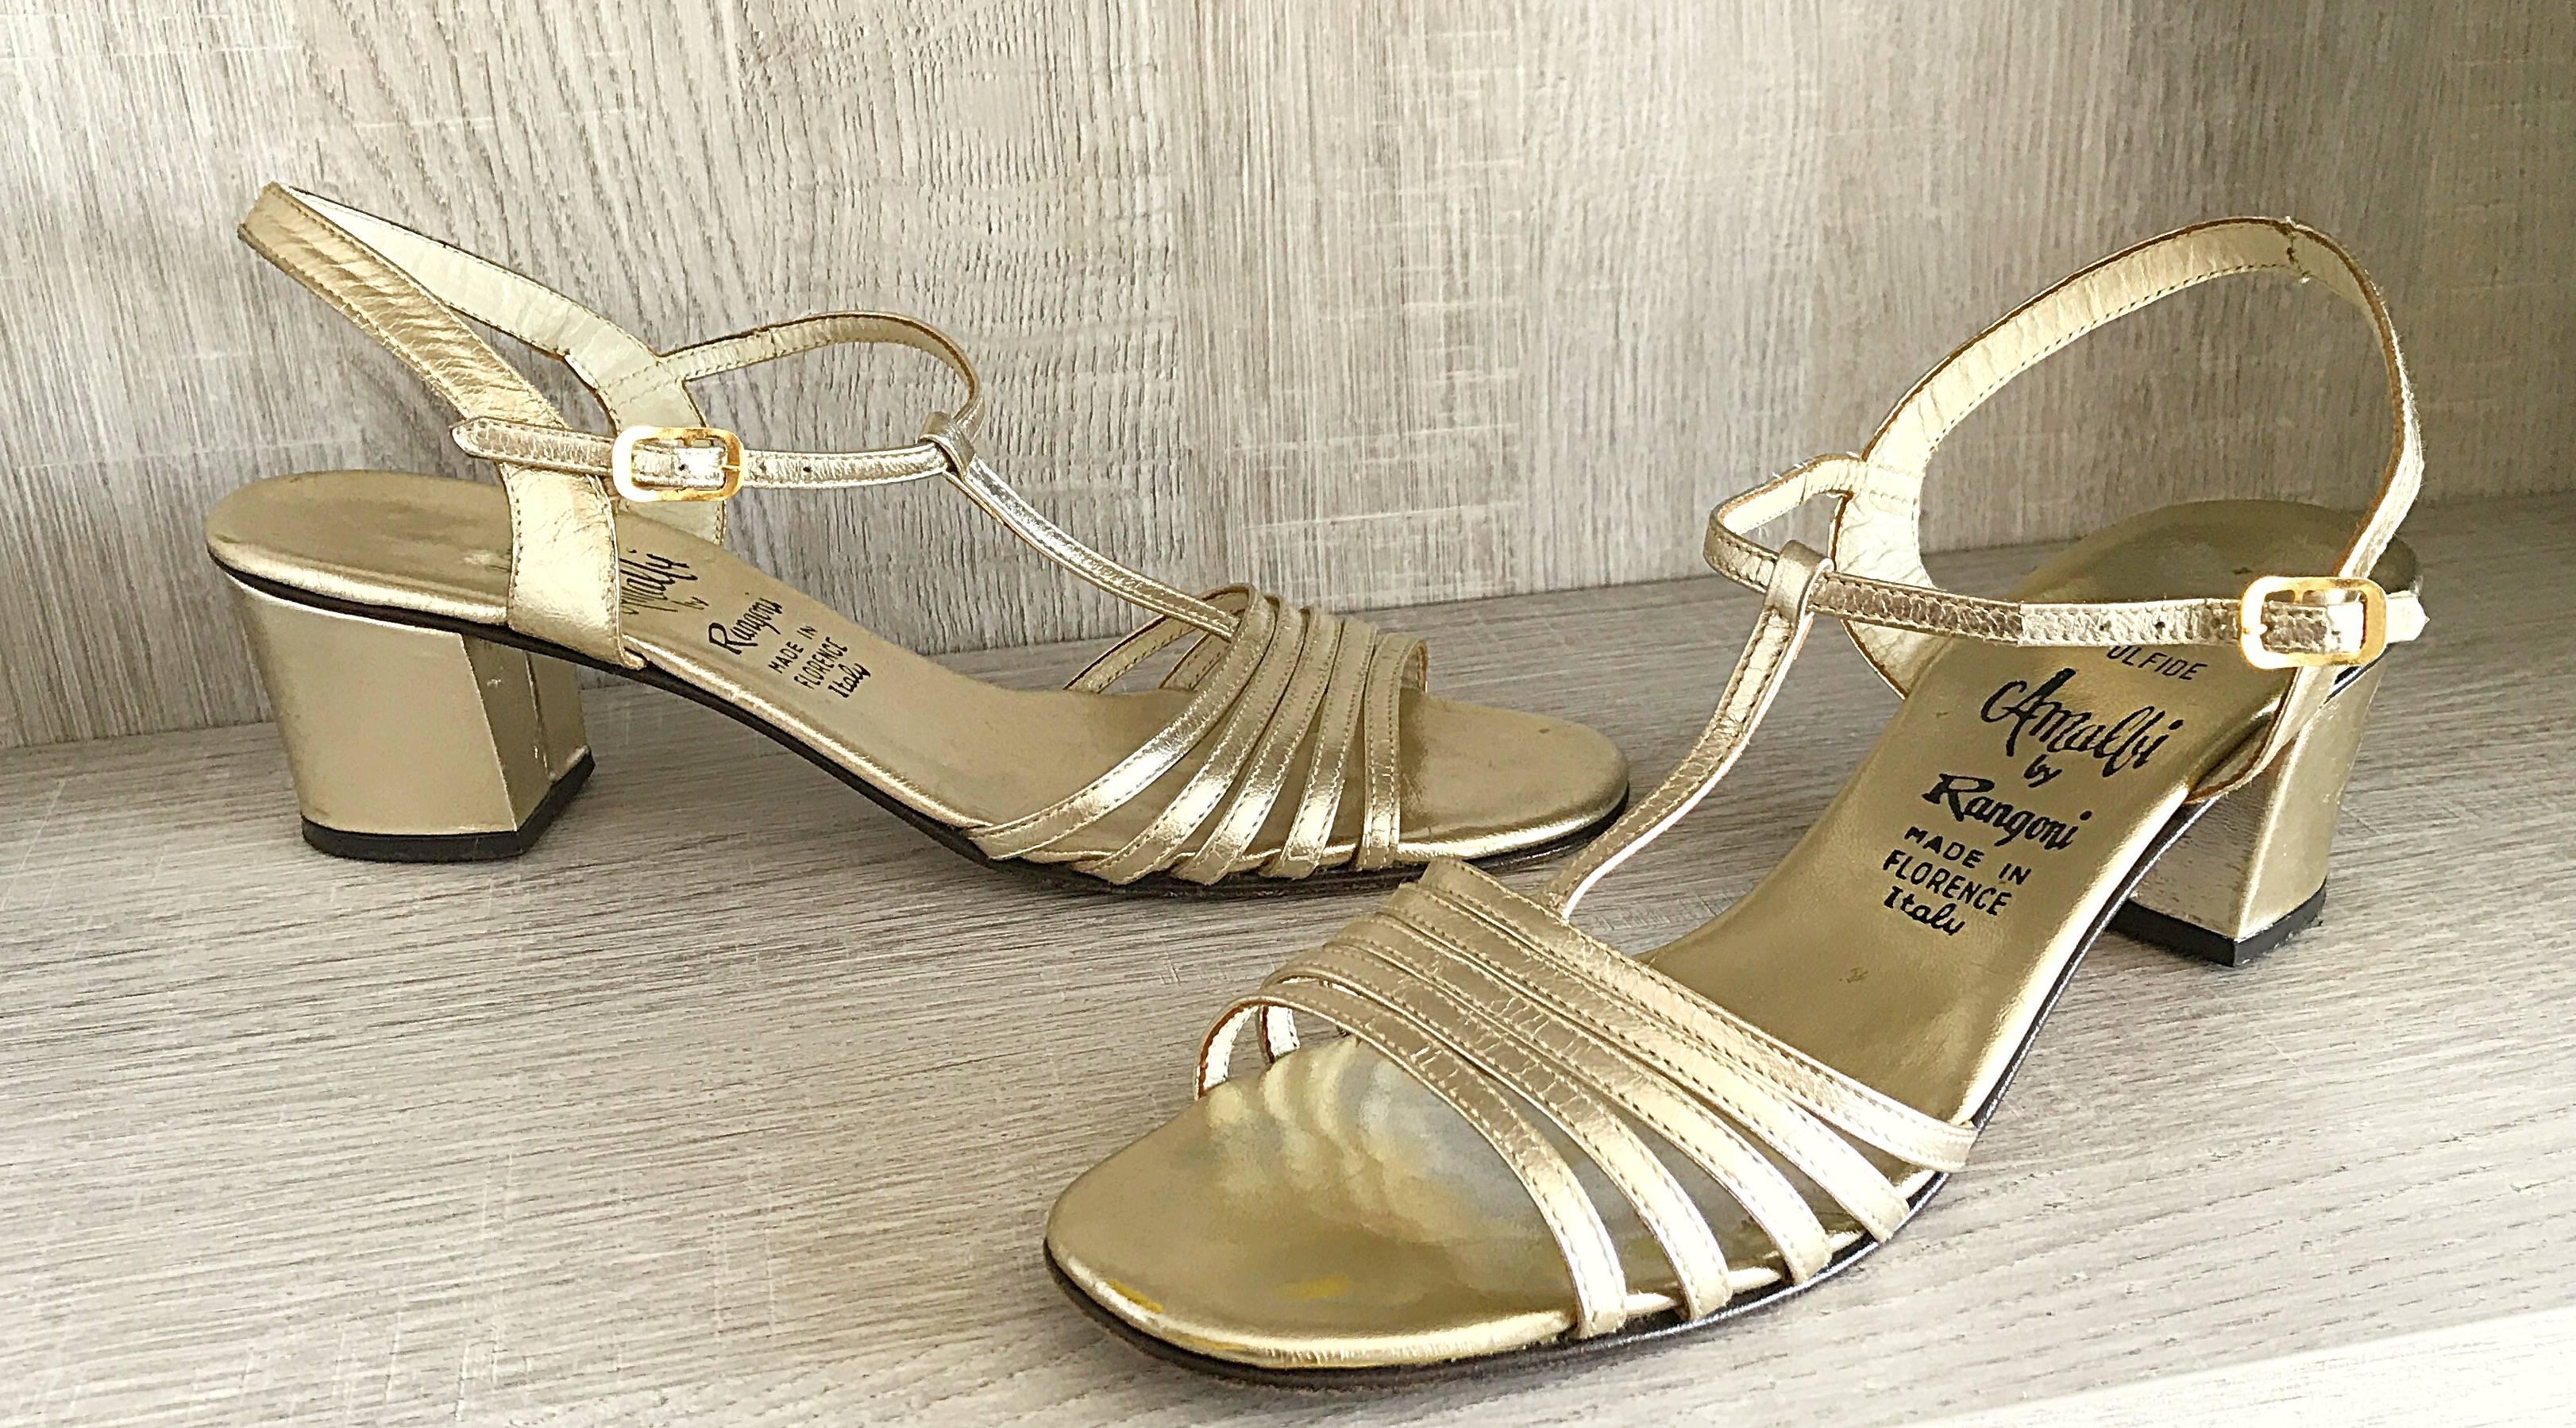 Chic 60s AMALFI BY RANGONI gold metallic leather high heeled Italian sandals! Gold strappy shoes, with so much attention to detail. Adjustable strap. Leather soles. Can easily be dressed up or down. Great with jeans, shorts, a skirt or a dress. In